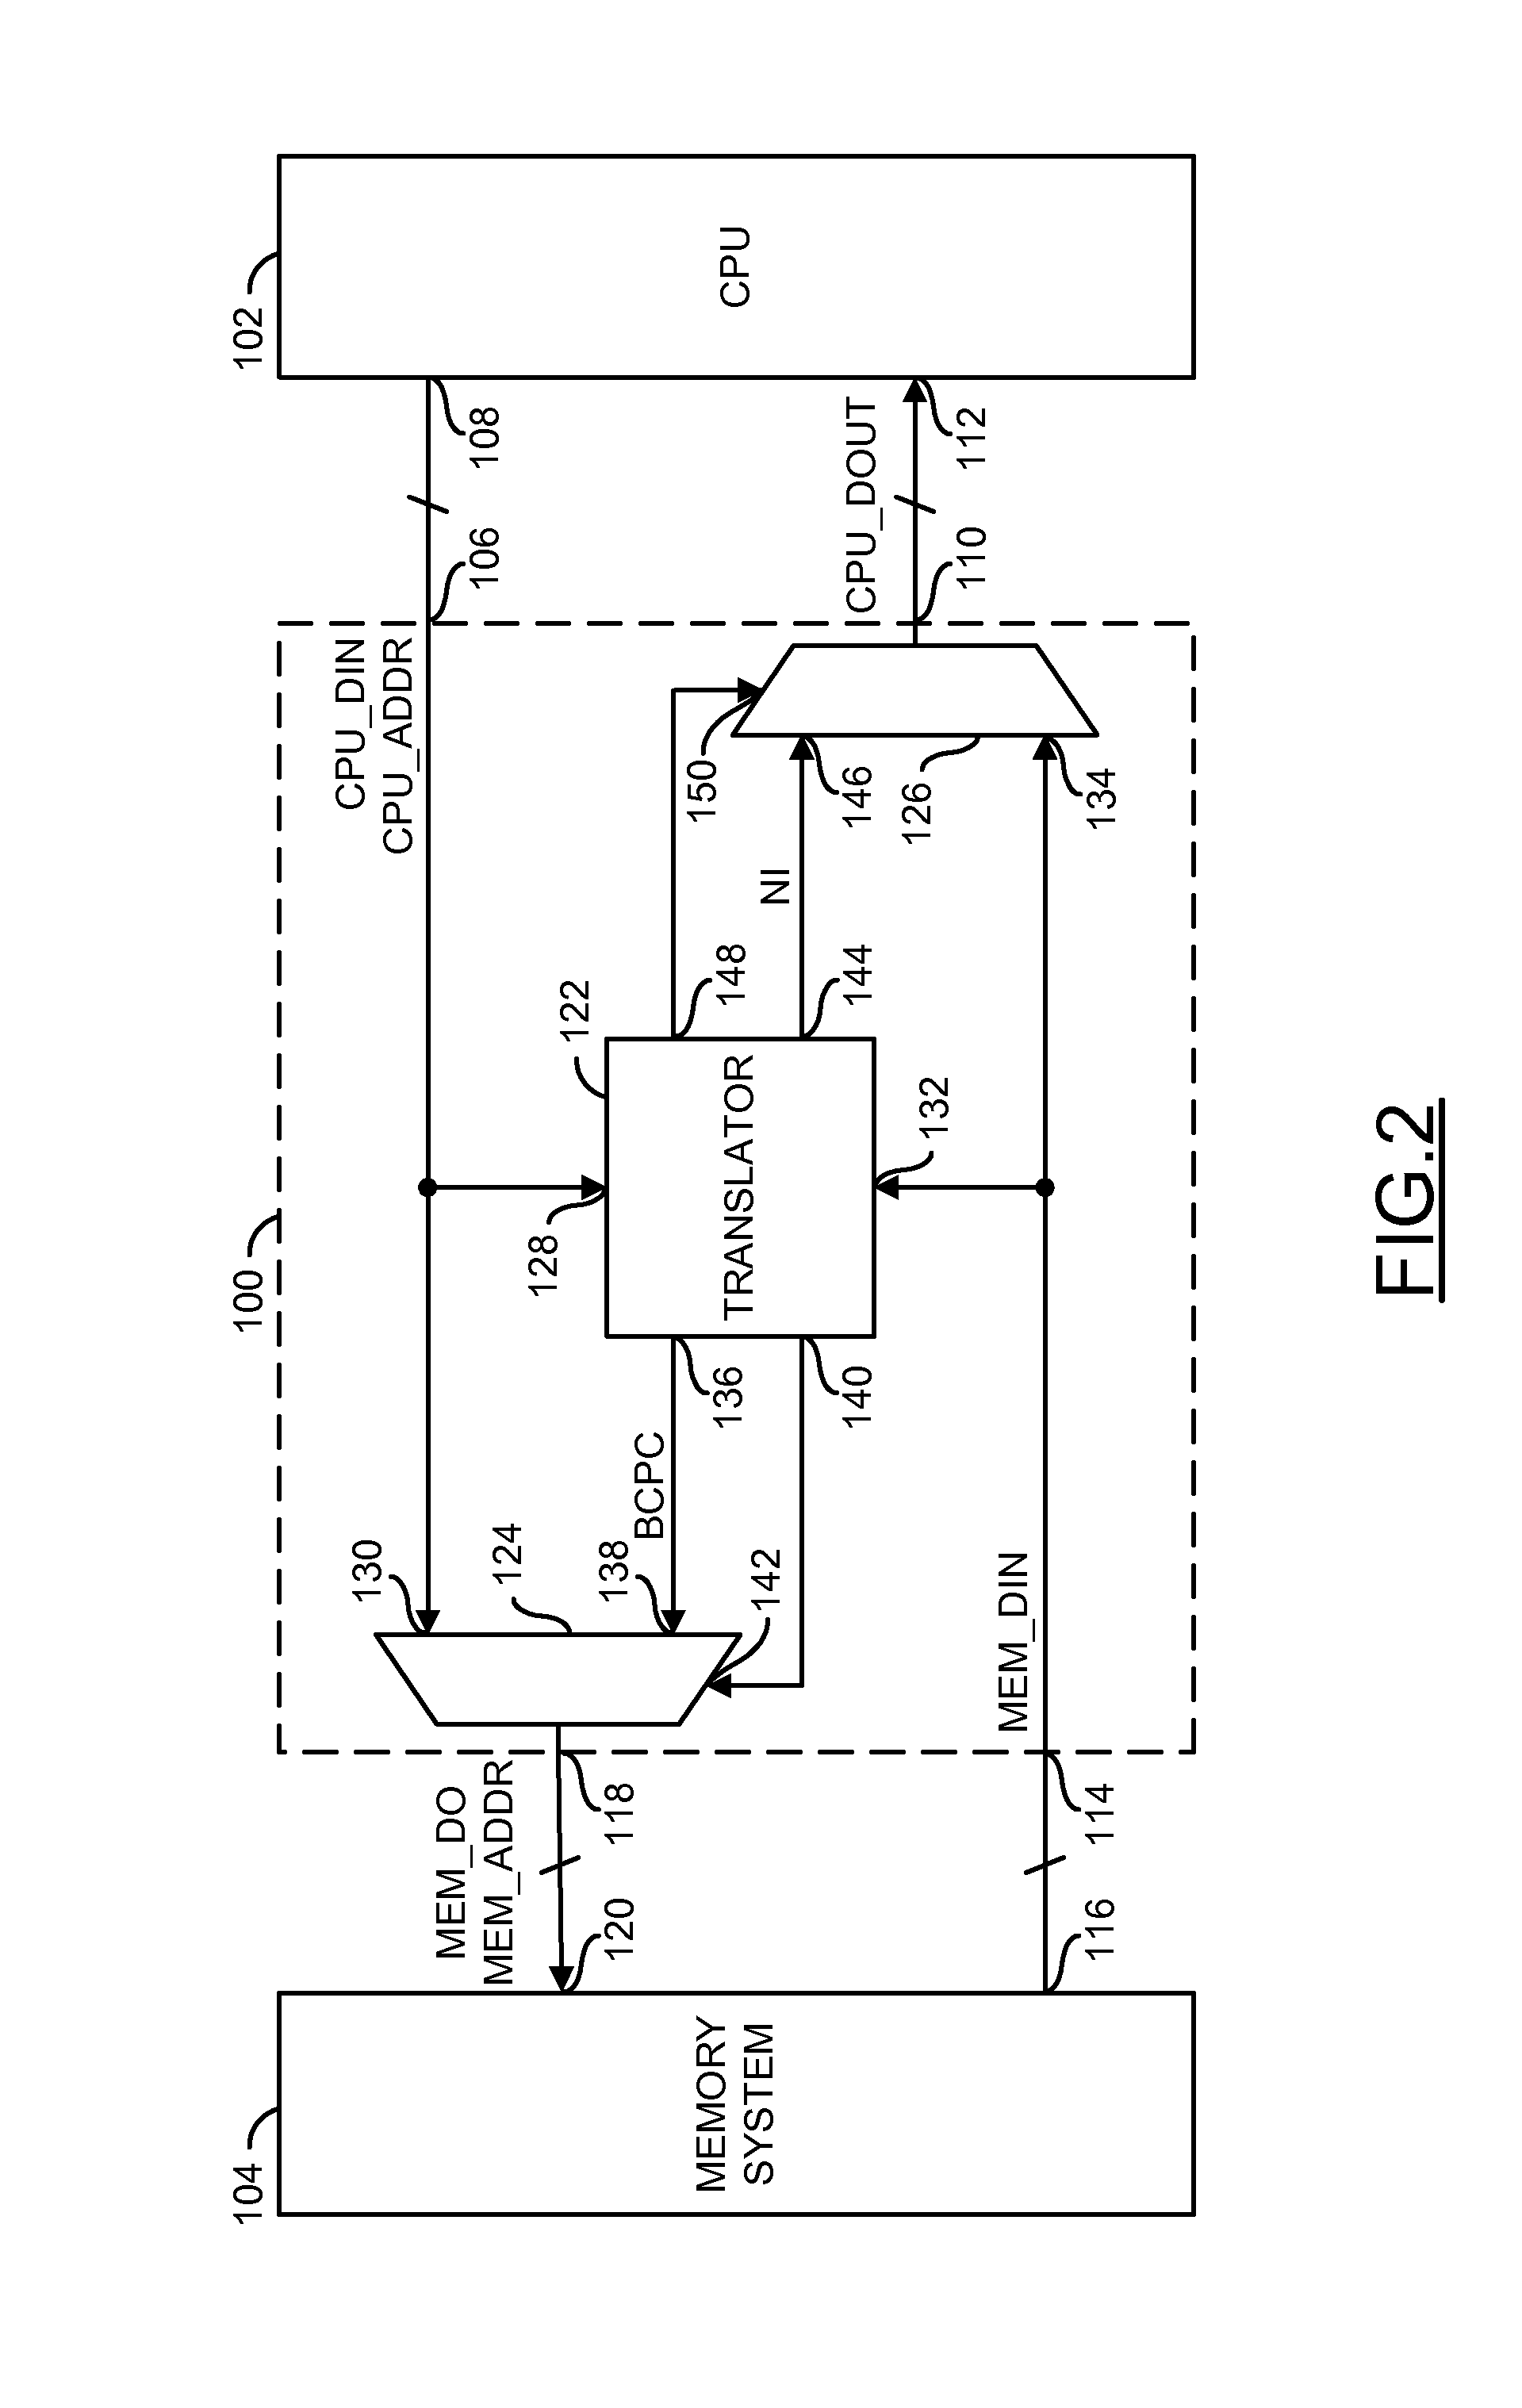 Microcode based hardware translator to support a multitude of processors